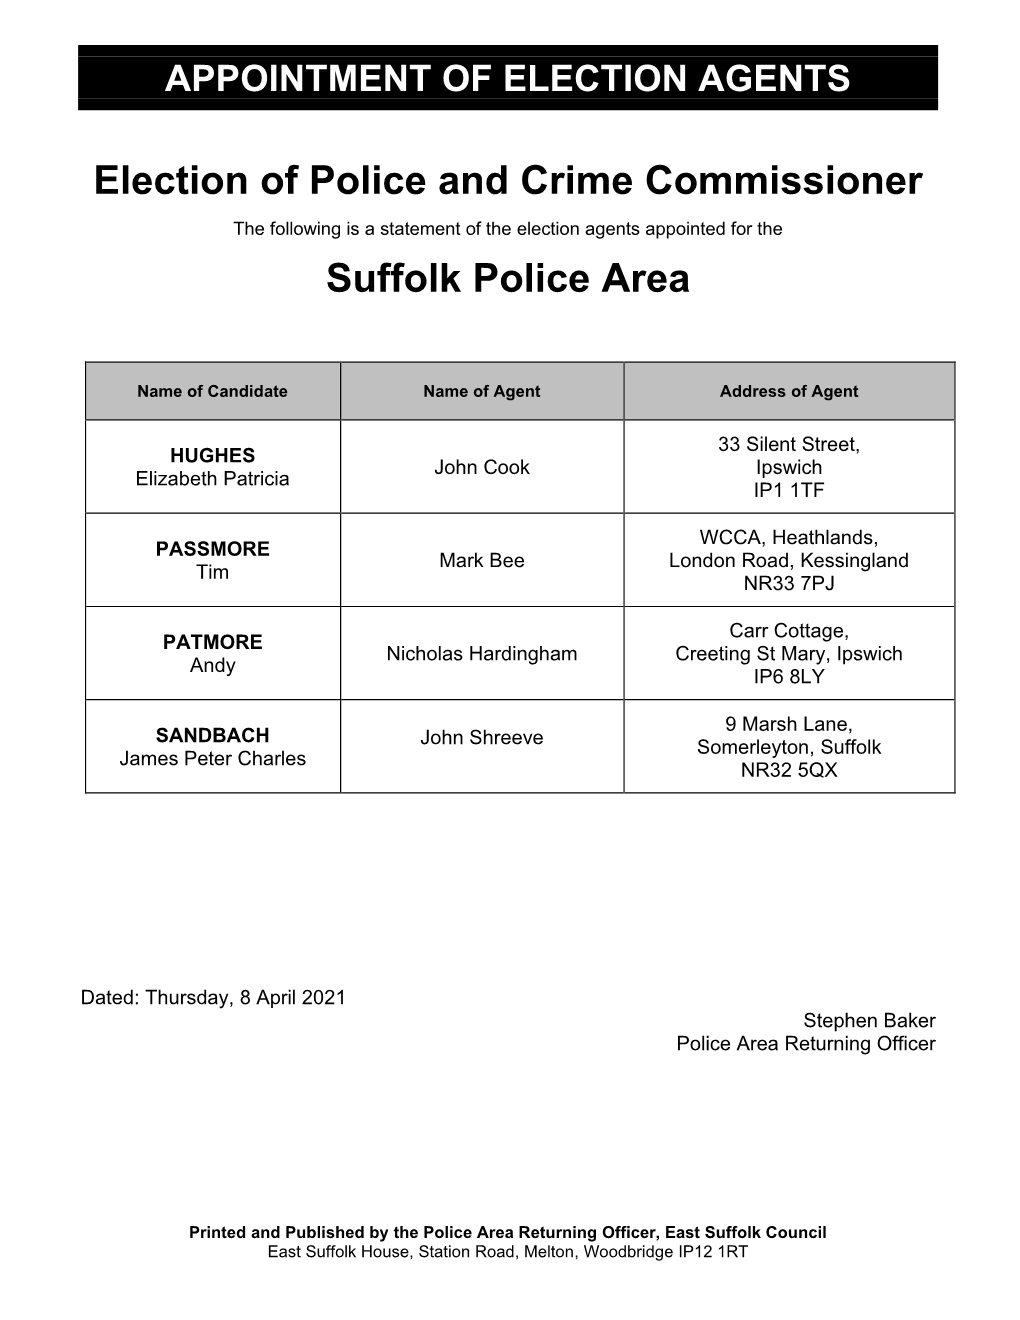 Election of Police and Crime Commissioner Suffolk Police Area